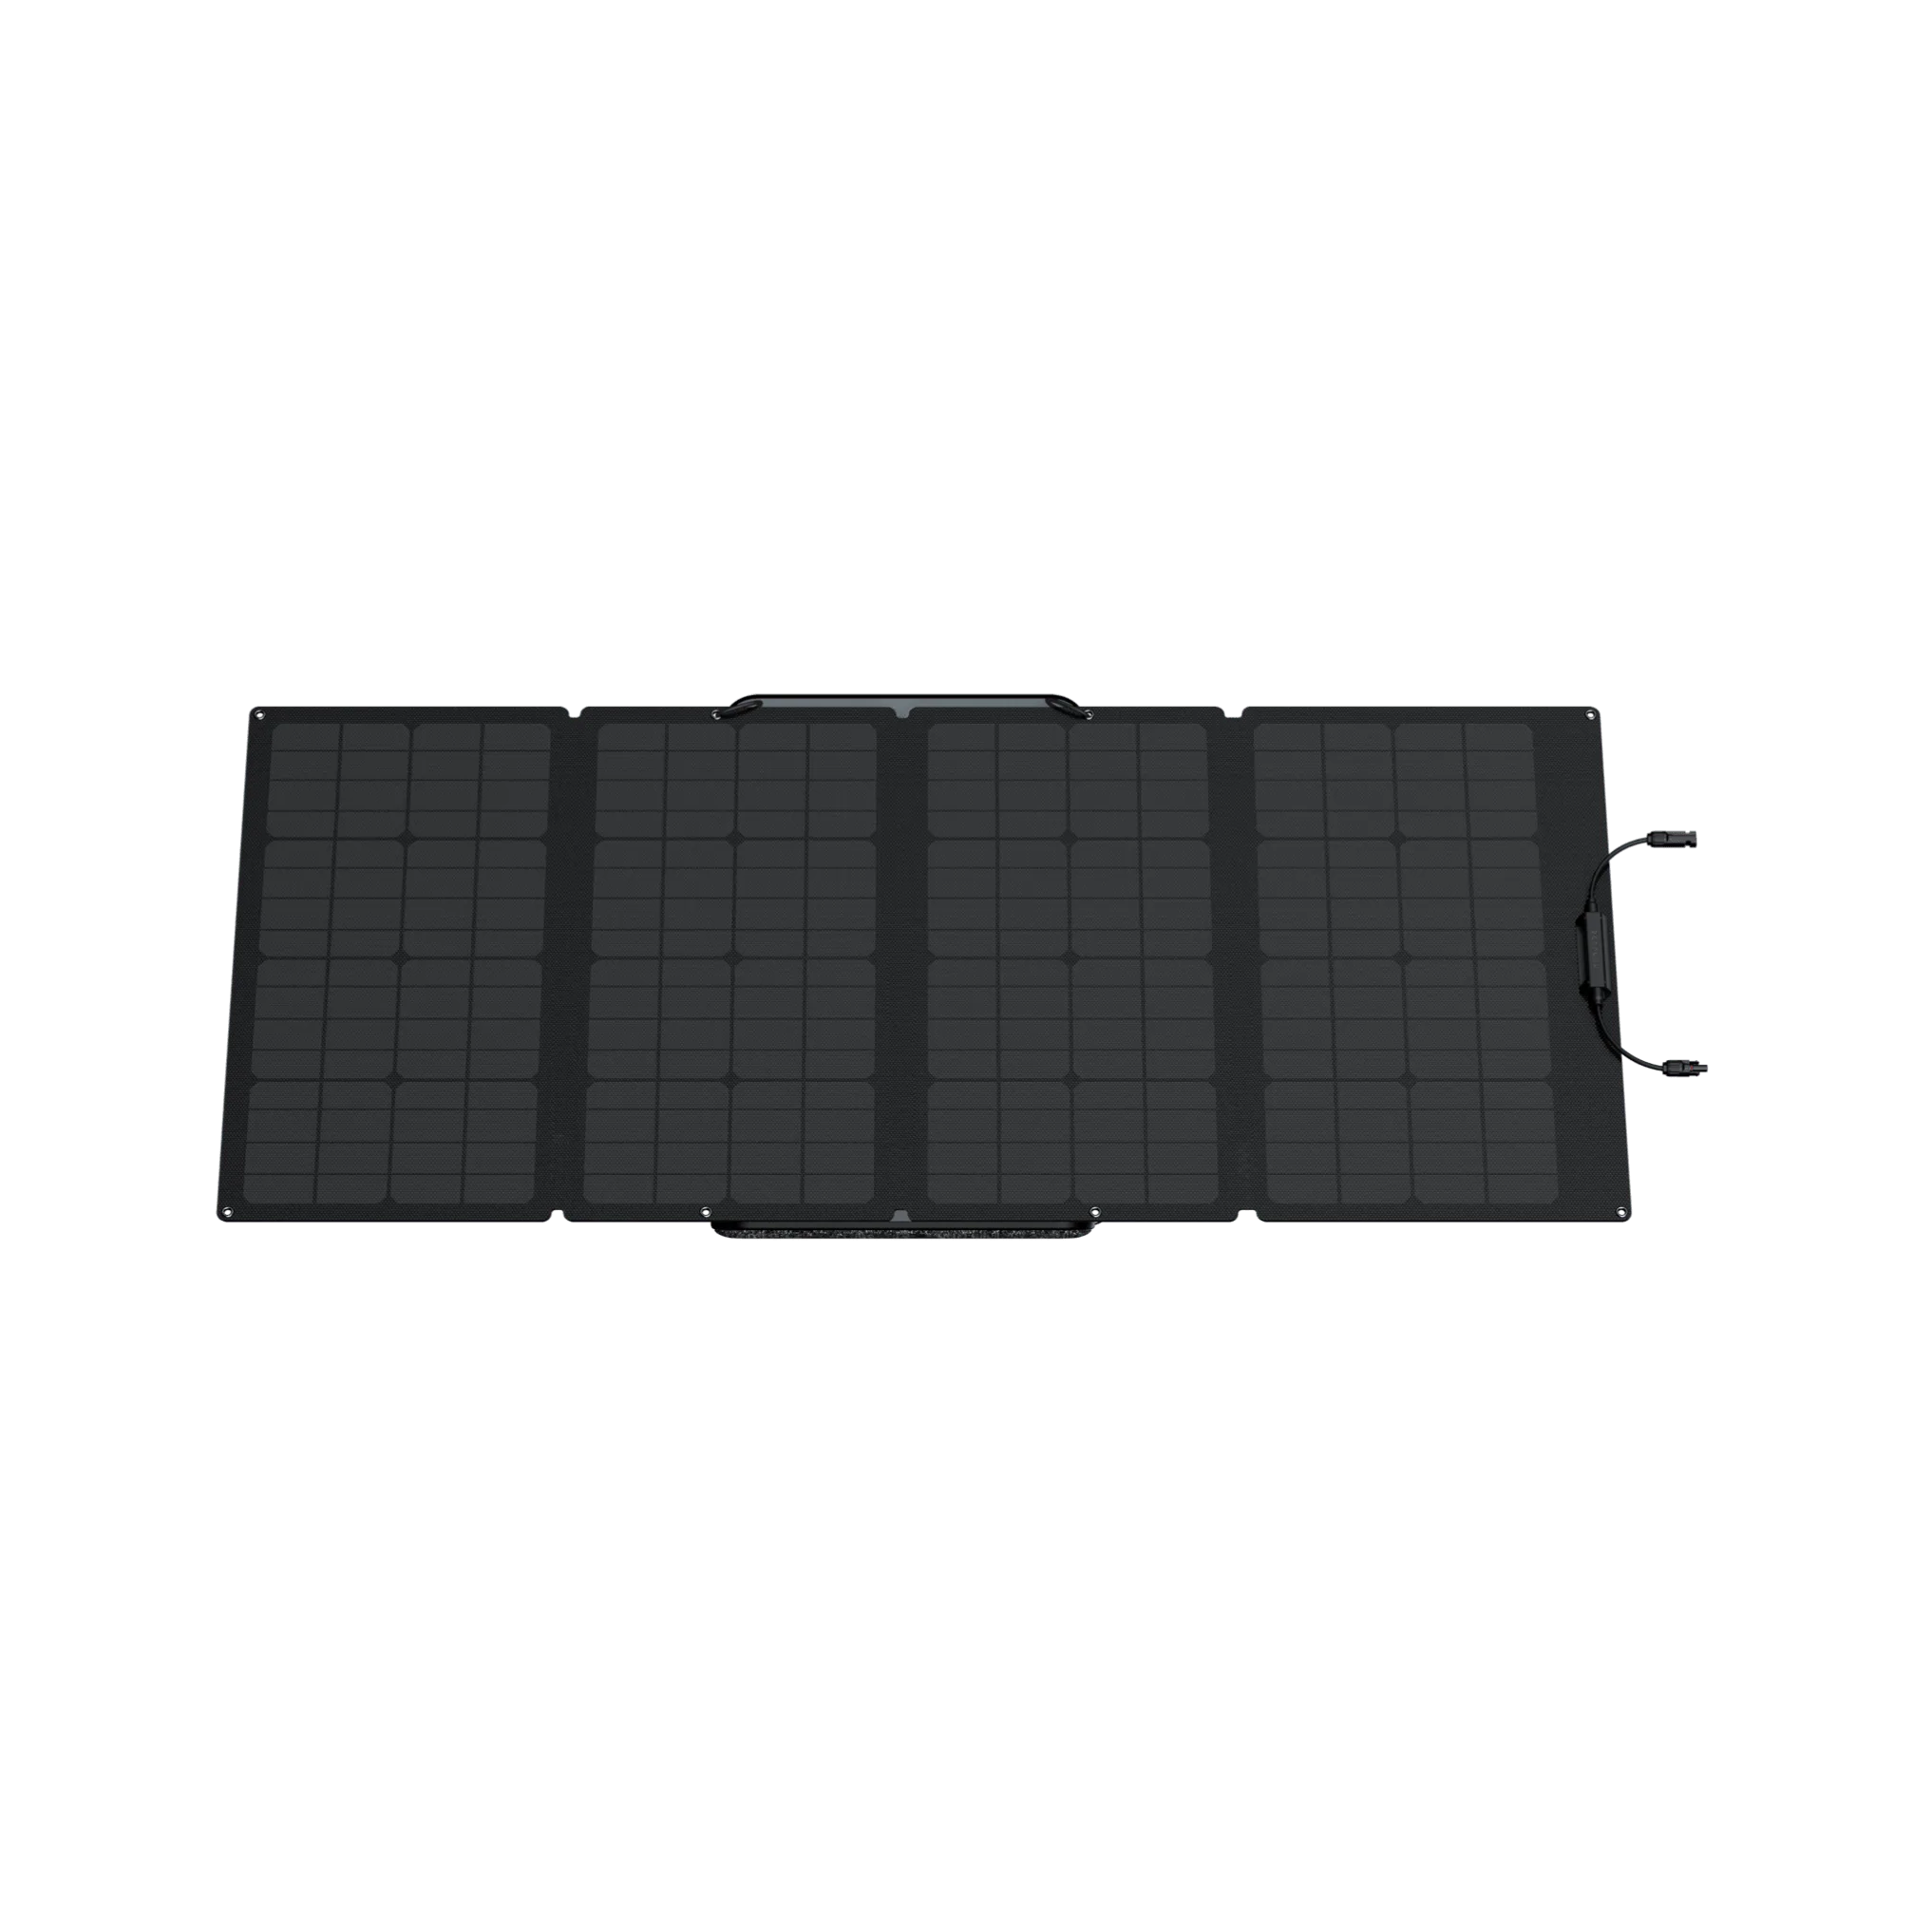 A black solar panel with a white background available for shipping in 1-2 weeks.